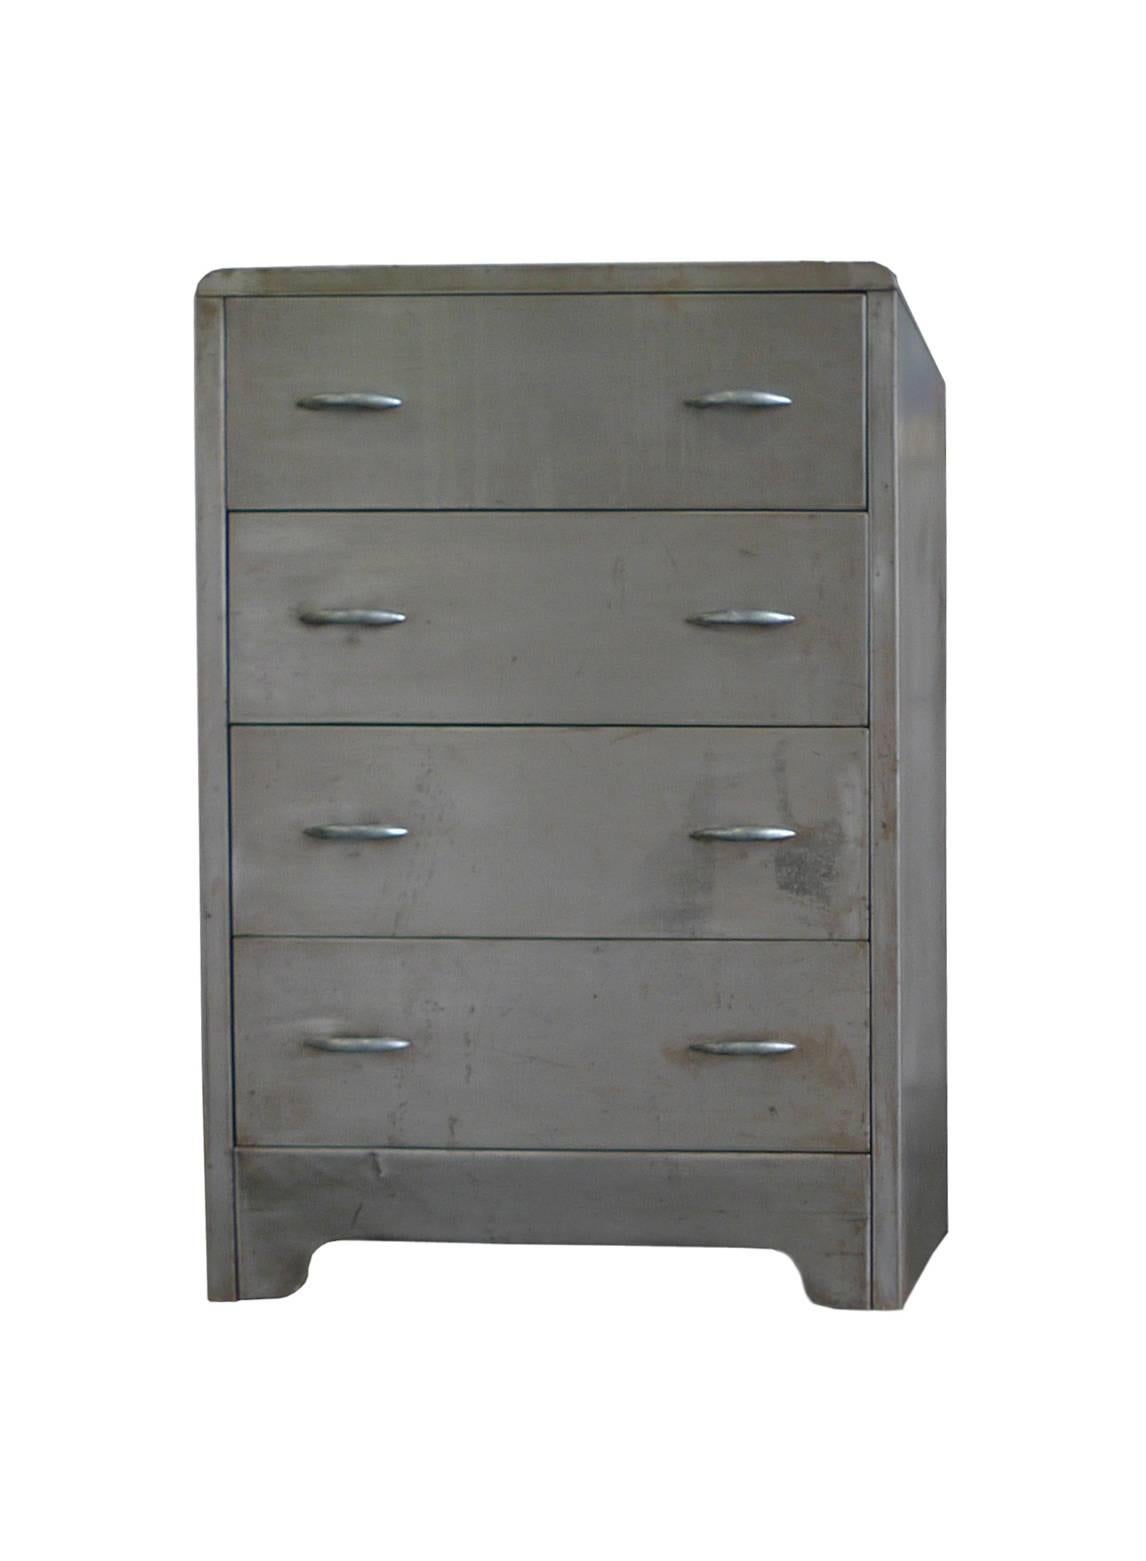 This industrial chest of drawers or dresser is comprised of polished steel. It's in the style of American designer Norman Bel Geddes renowned for his streamlined and Futurist designs with hints of Art Deco. The dresser combines rounded edges and